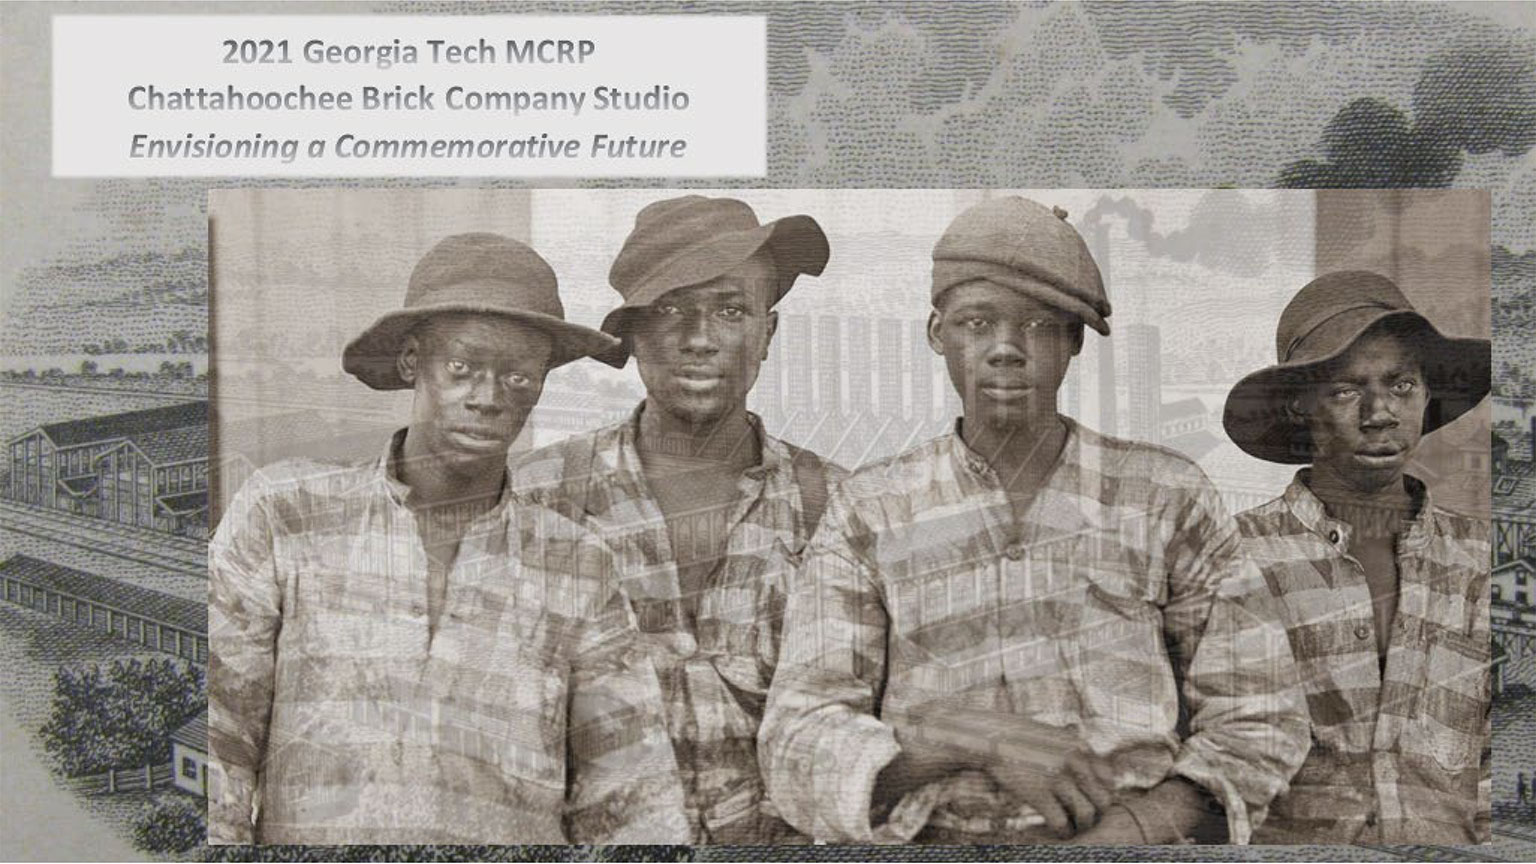 A historic photo collage of black men and the Chattahoochee Brick Company.